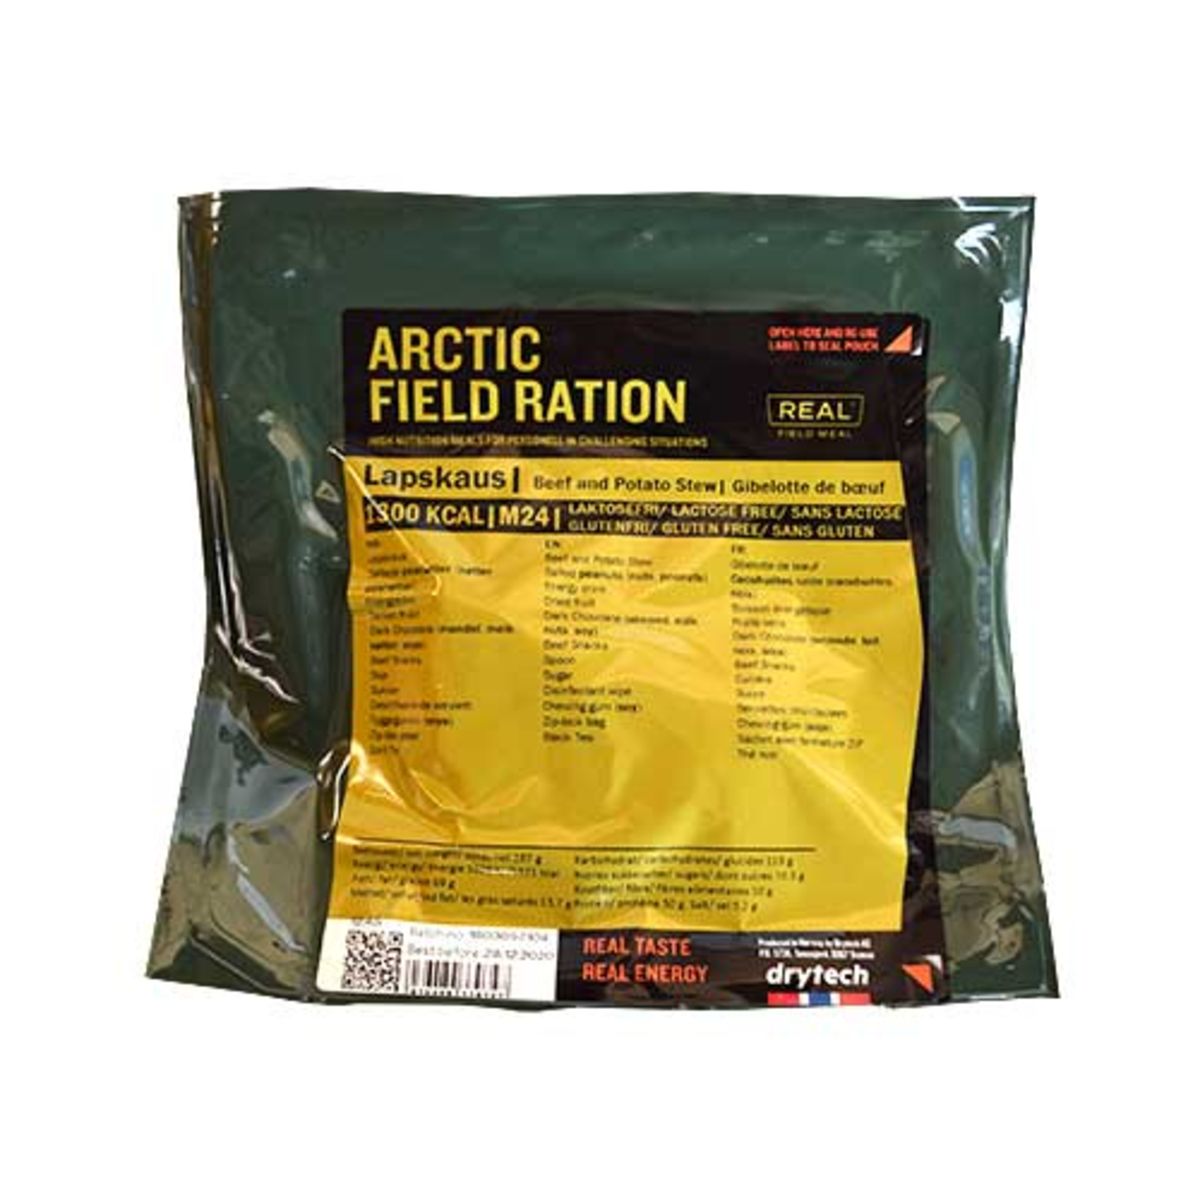 Freeze dried ration - Creamy salmon with pasta - Arctic Field Ration